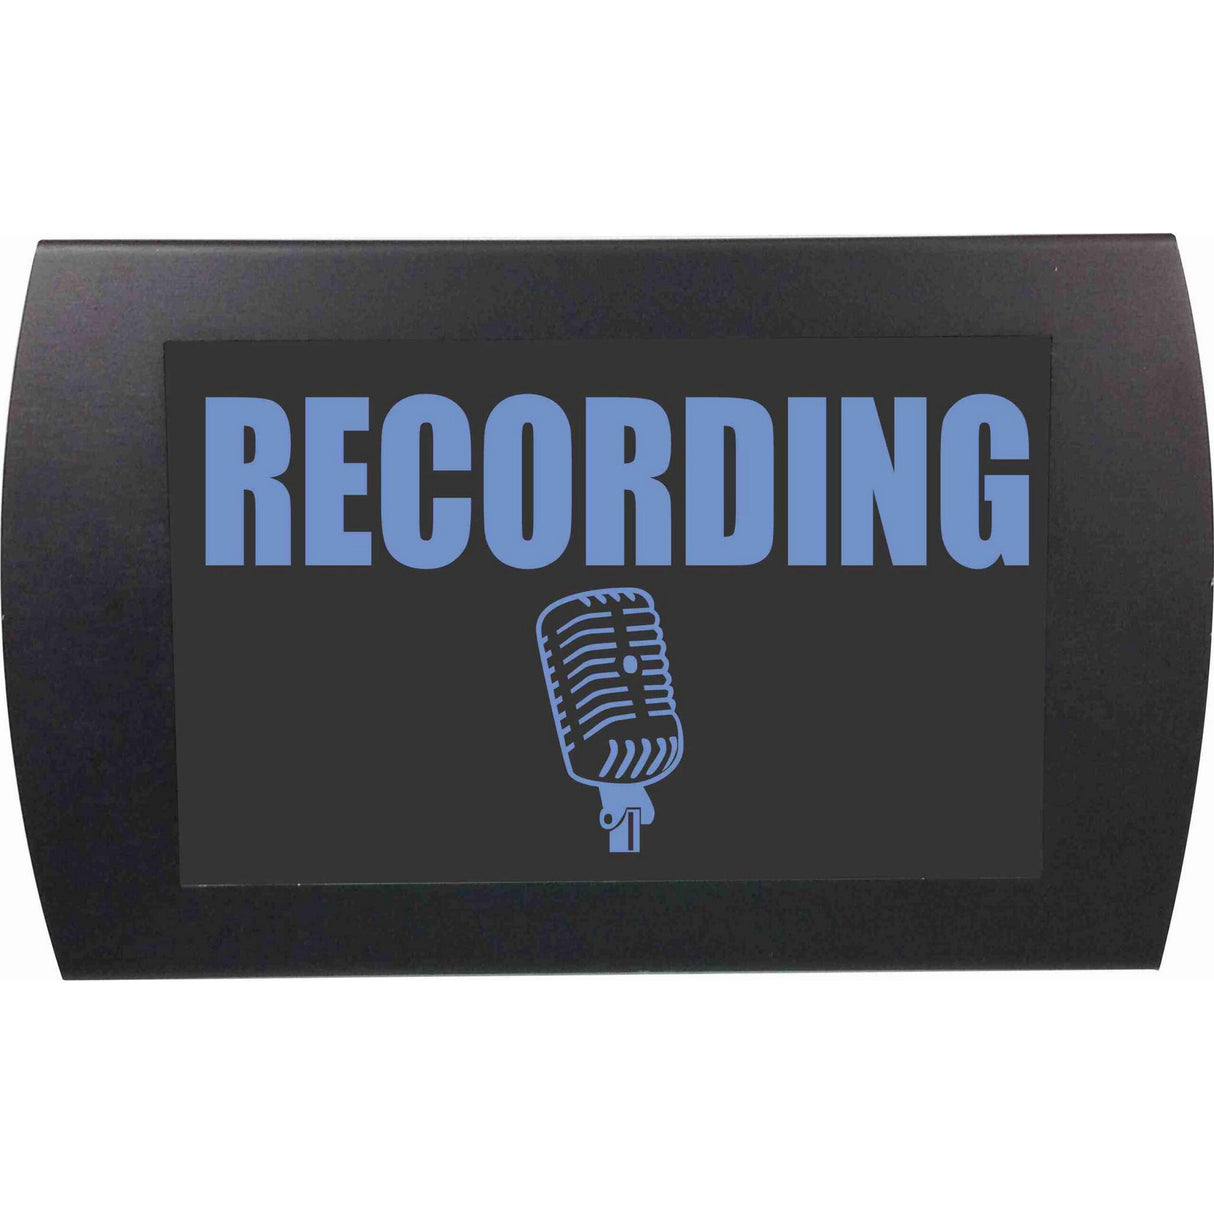 American Recorder OAS-2002M-BL "RECORDING" LED Lighted Sign, Blue